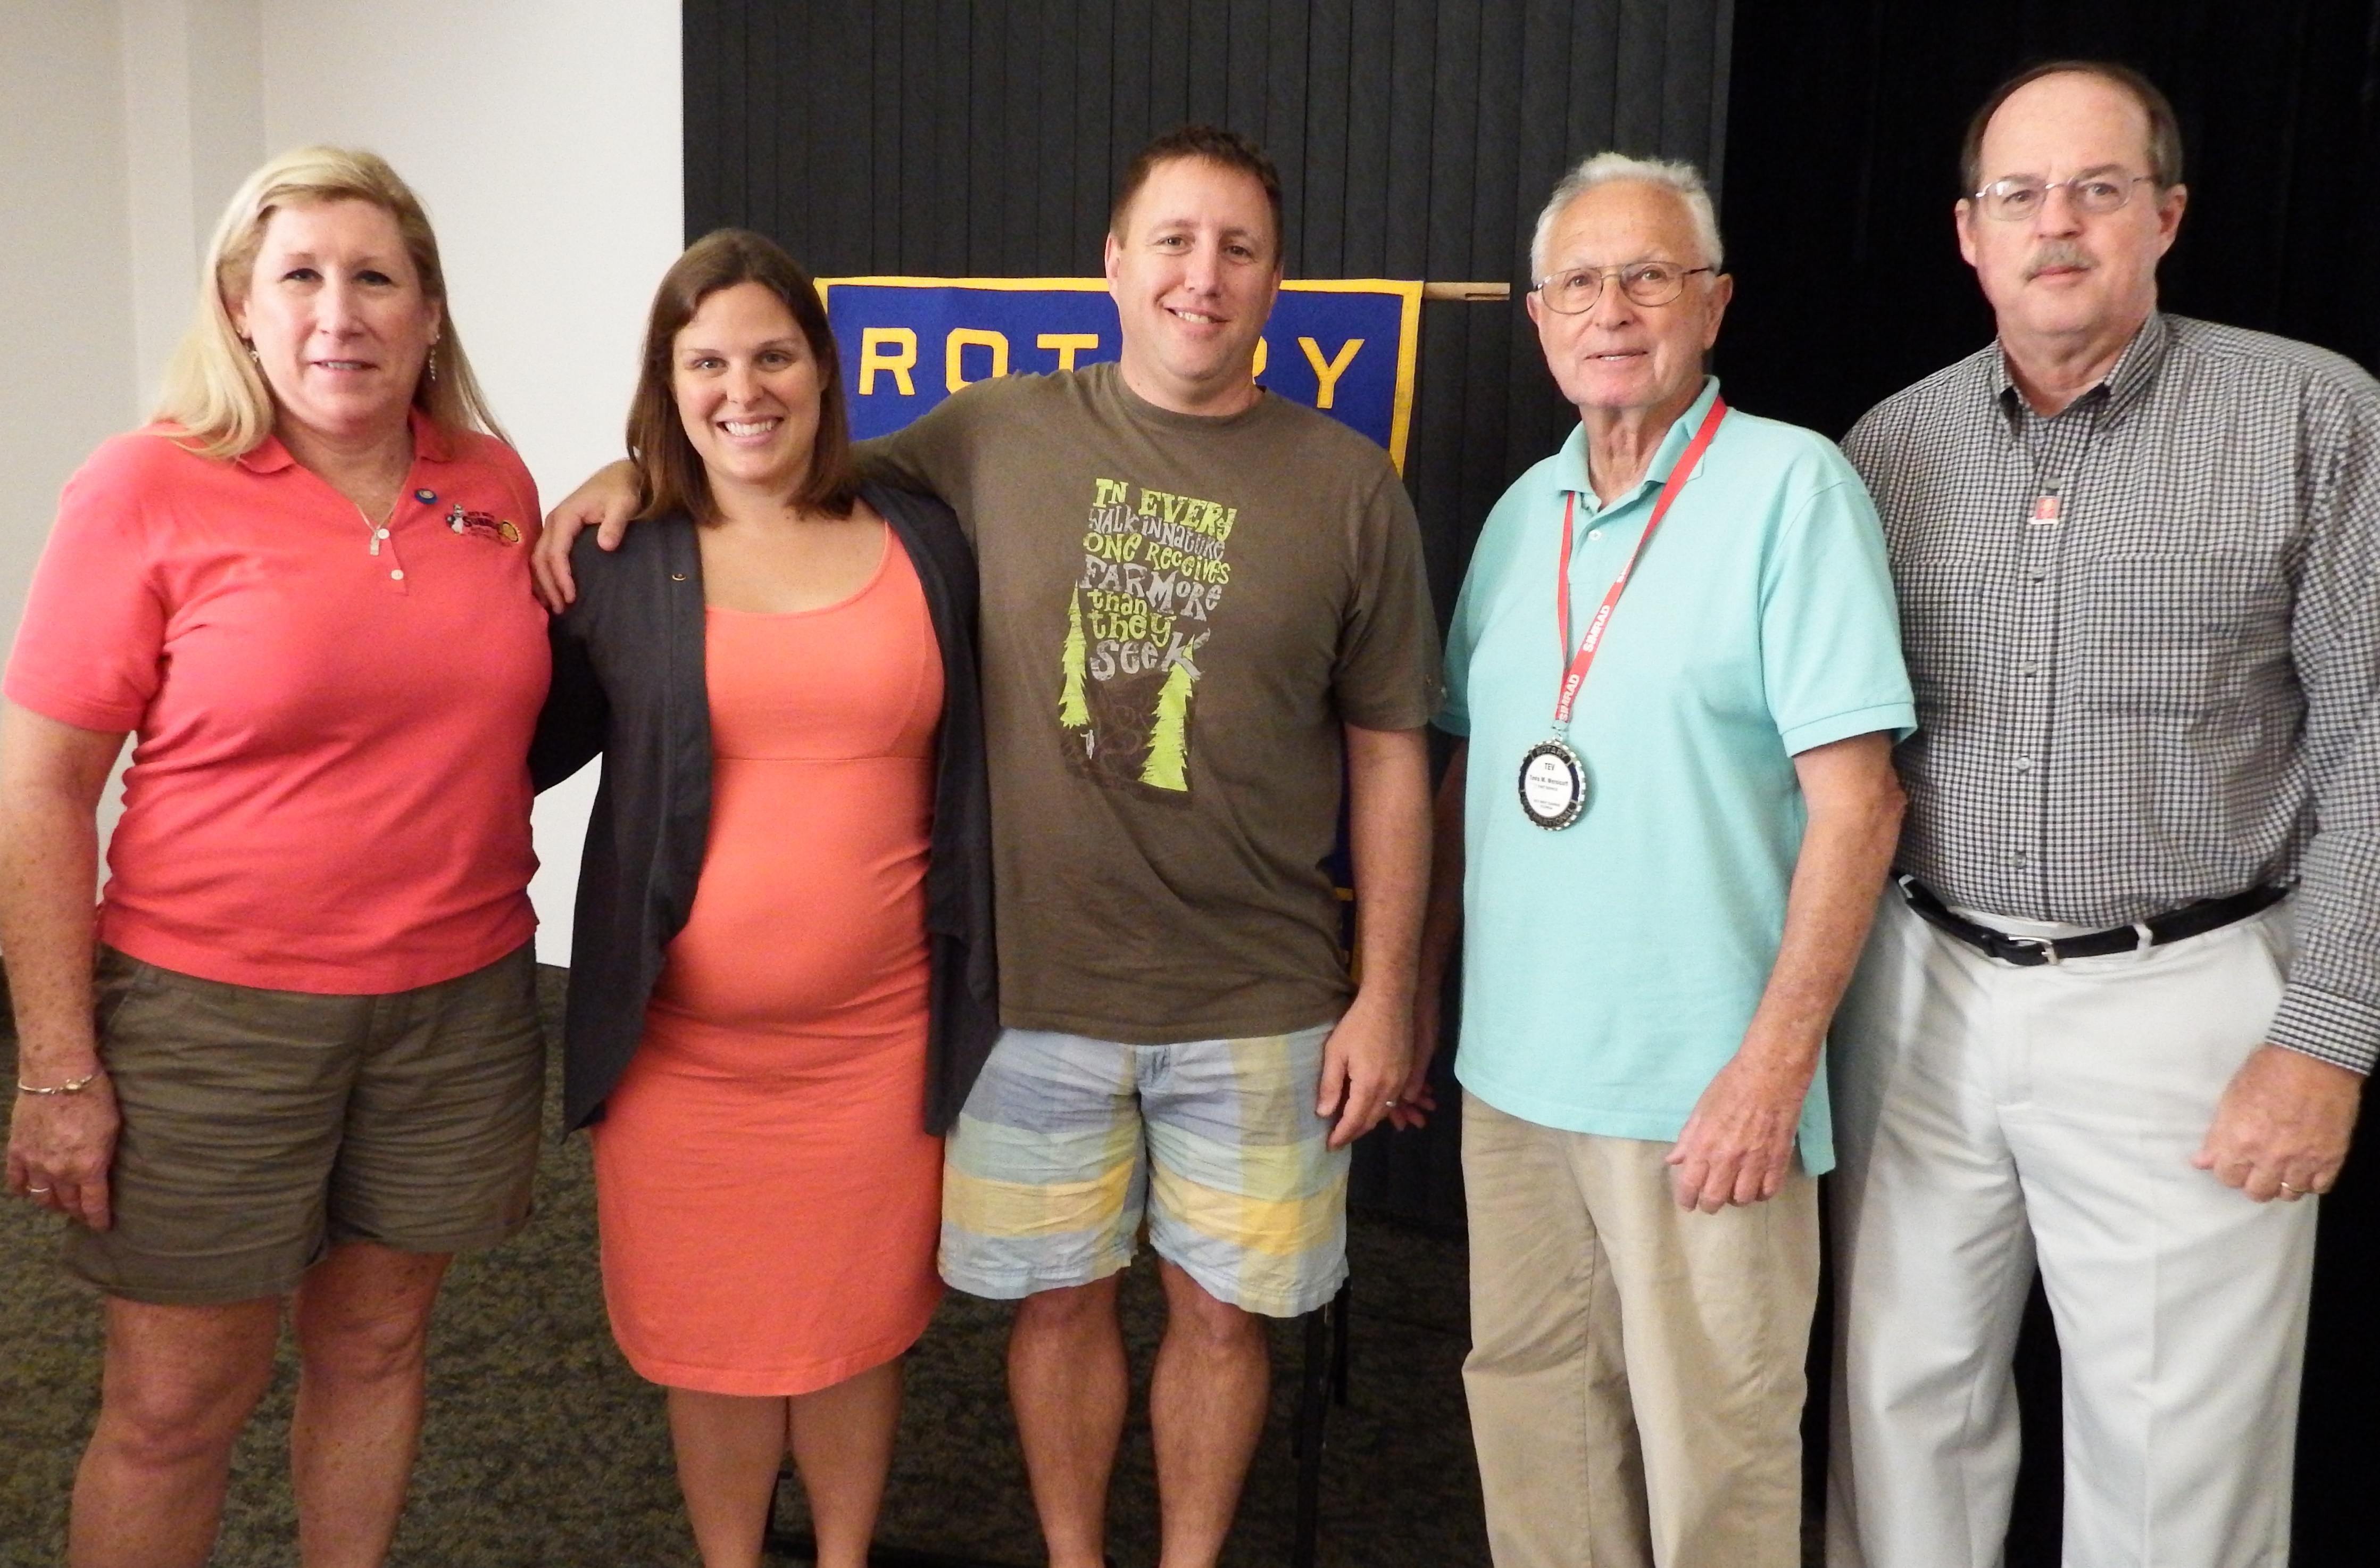 Public Defender and USCG Officer Join Key West Sunrise Rotary